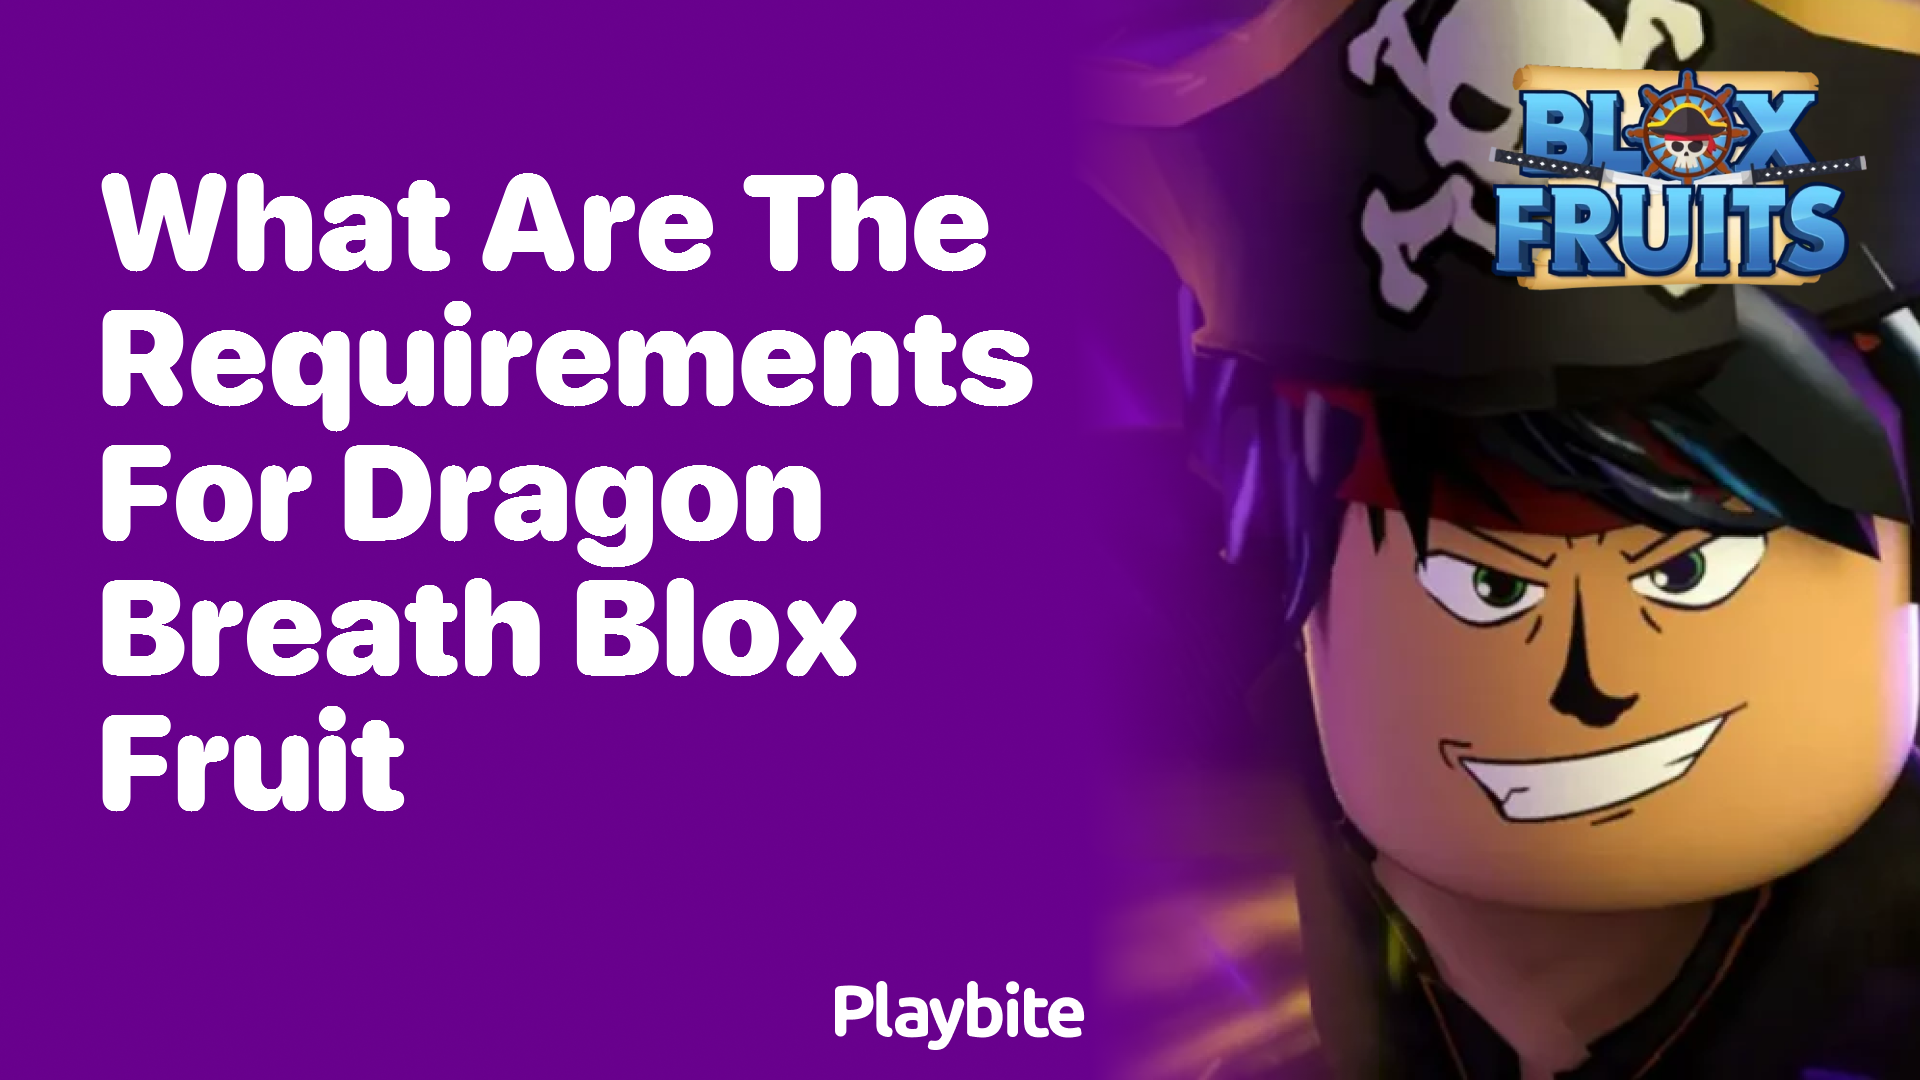 What Are the Requirements for Dragon Breath in Blox Fruit?